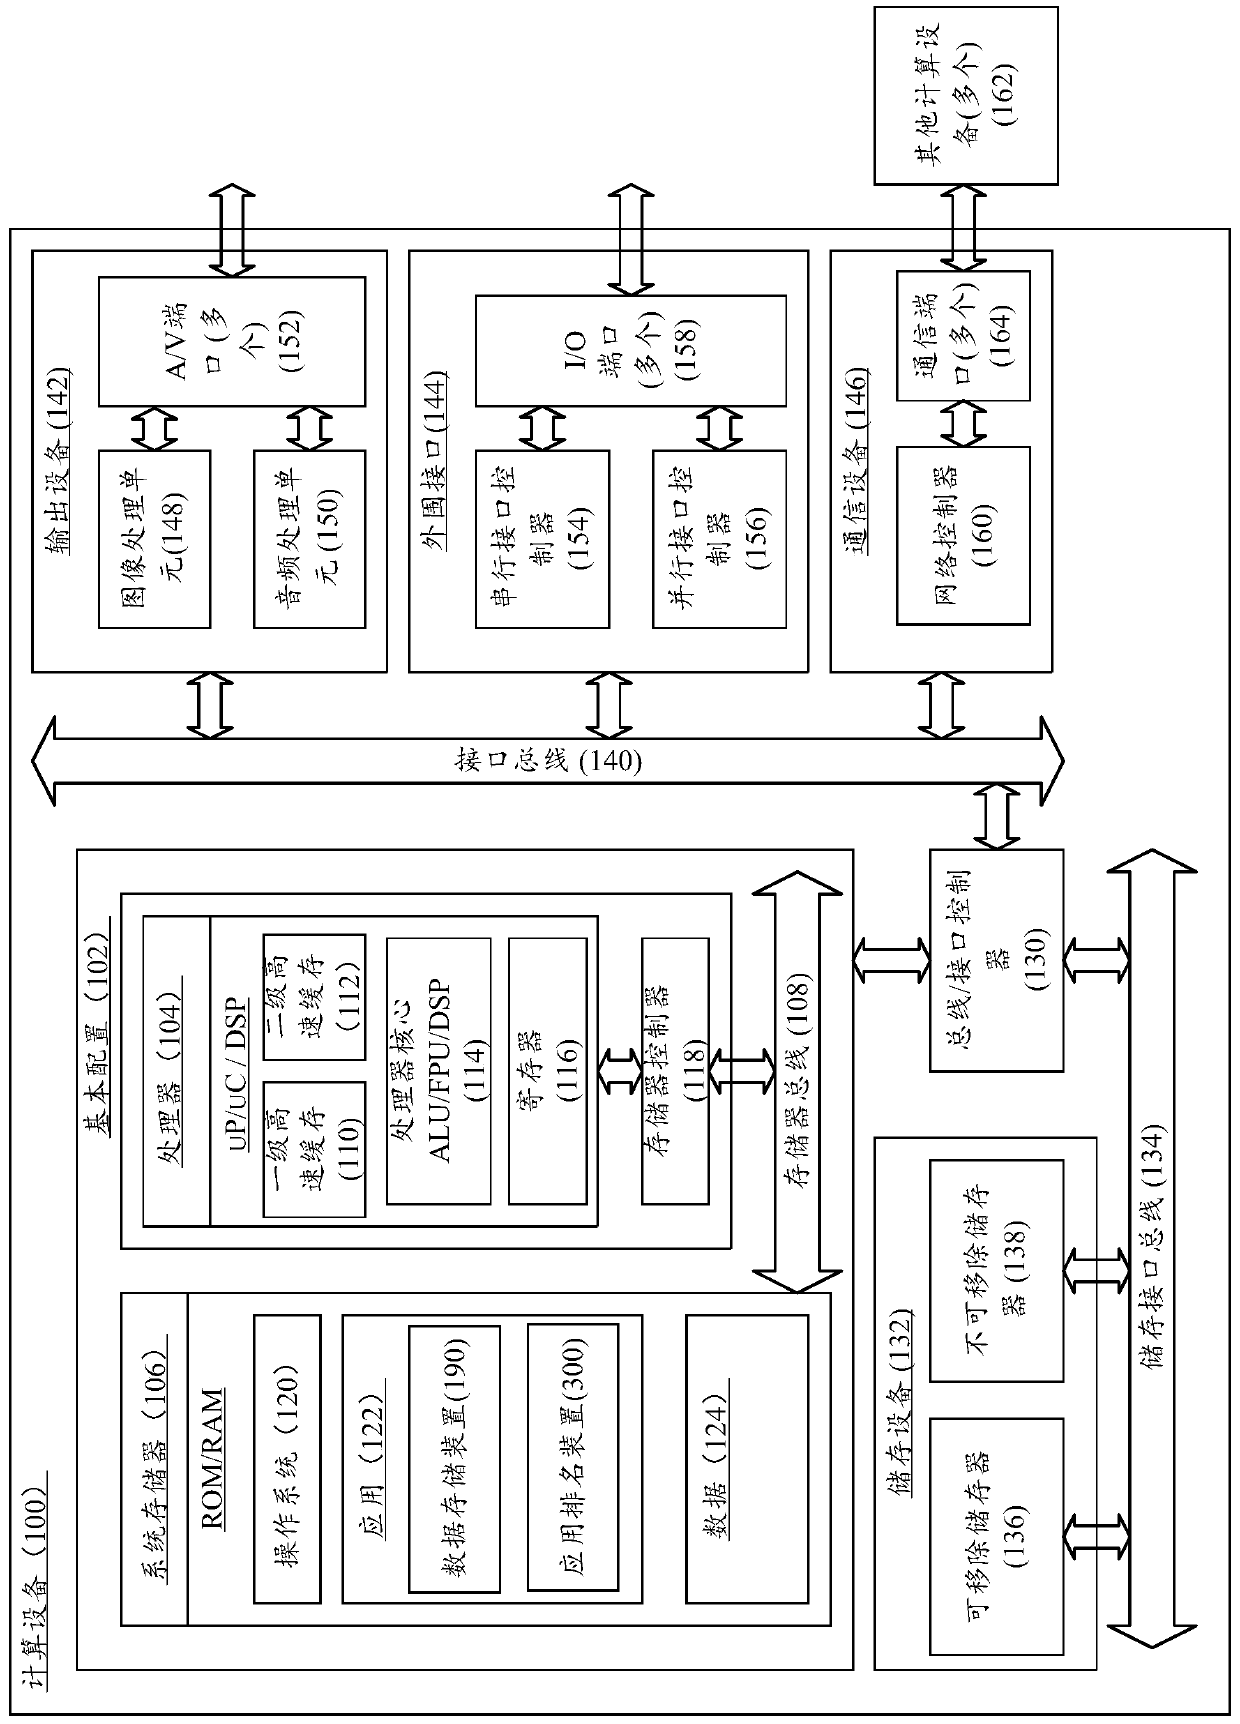 An application ranking method, device and computing device